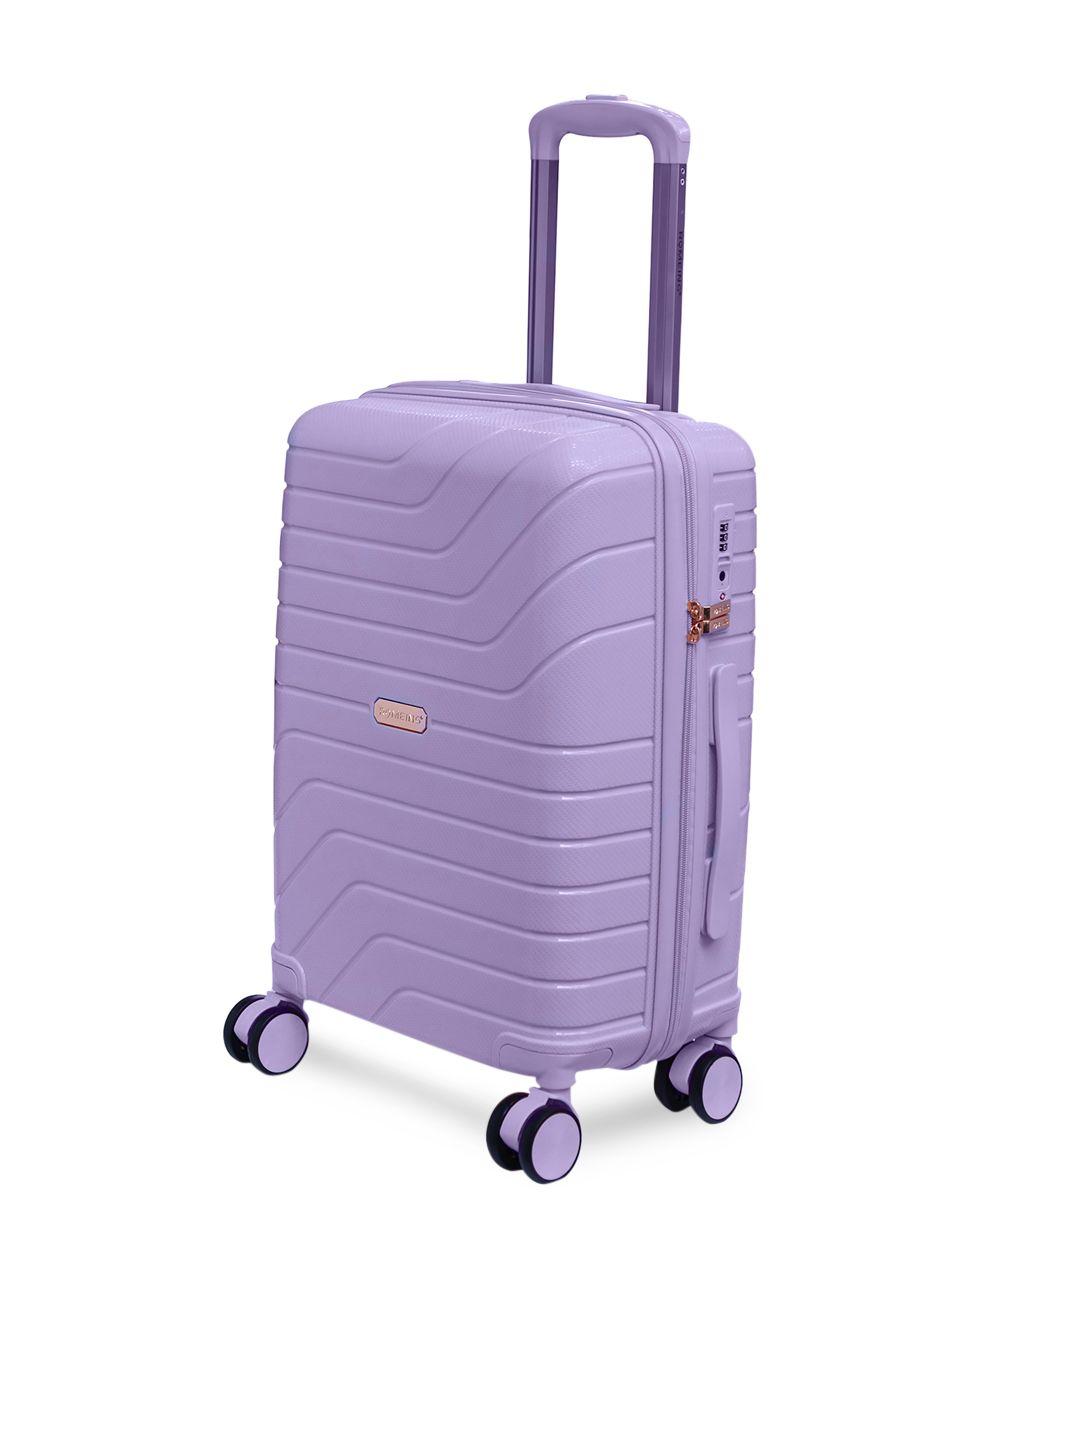 romeing tuscany textured hard-sided cabin trolley suitcase